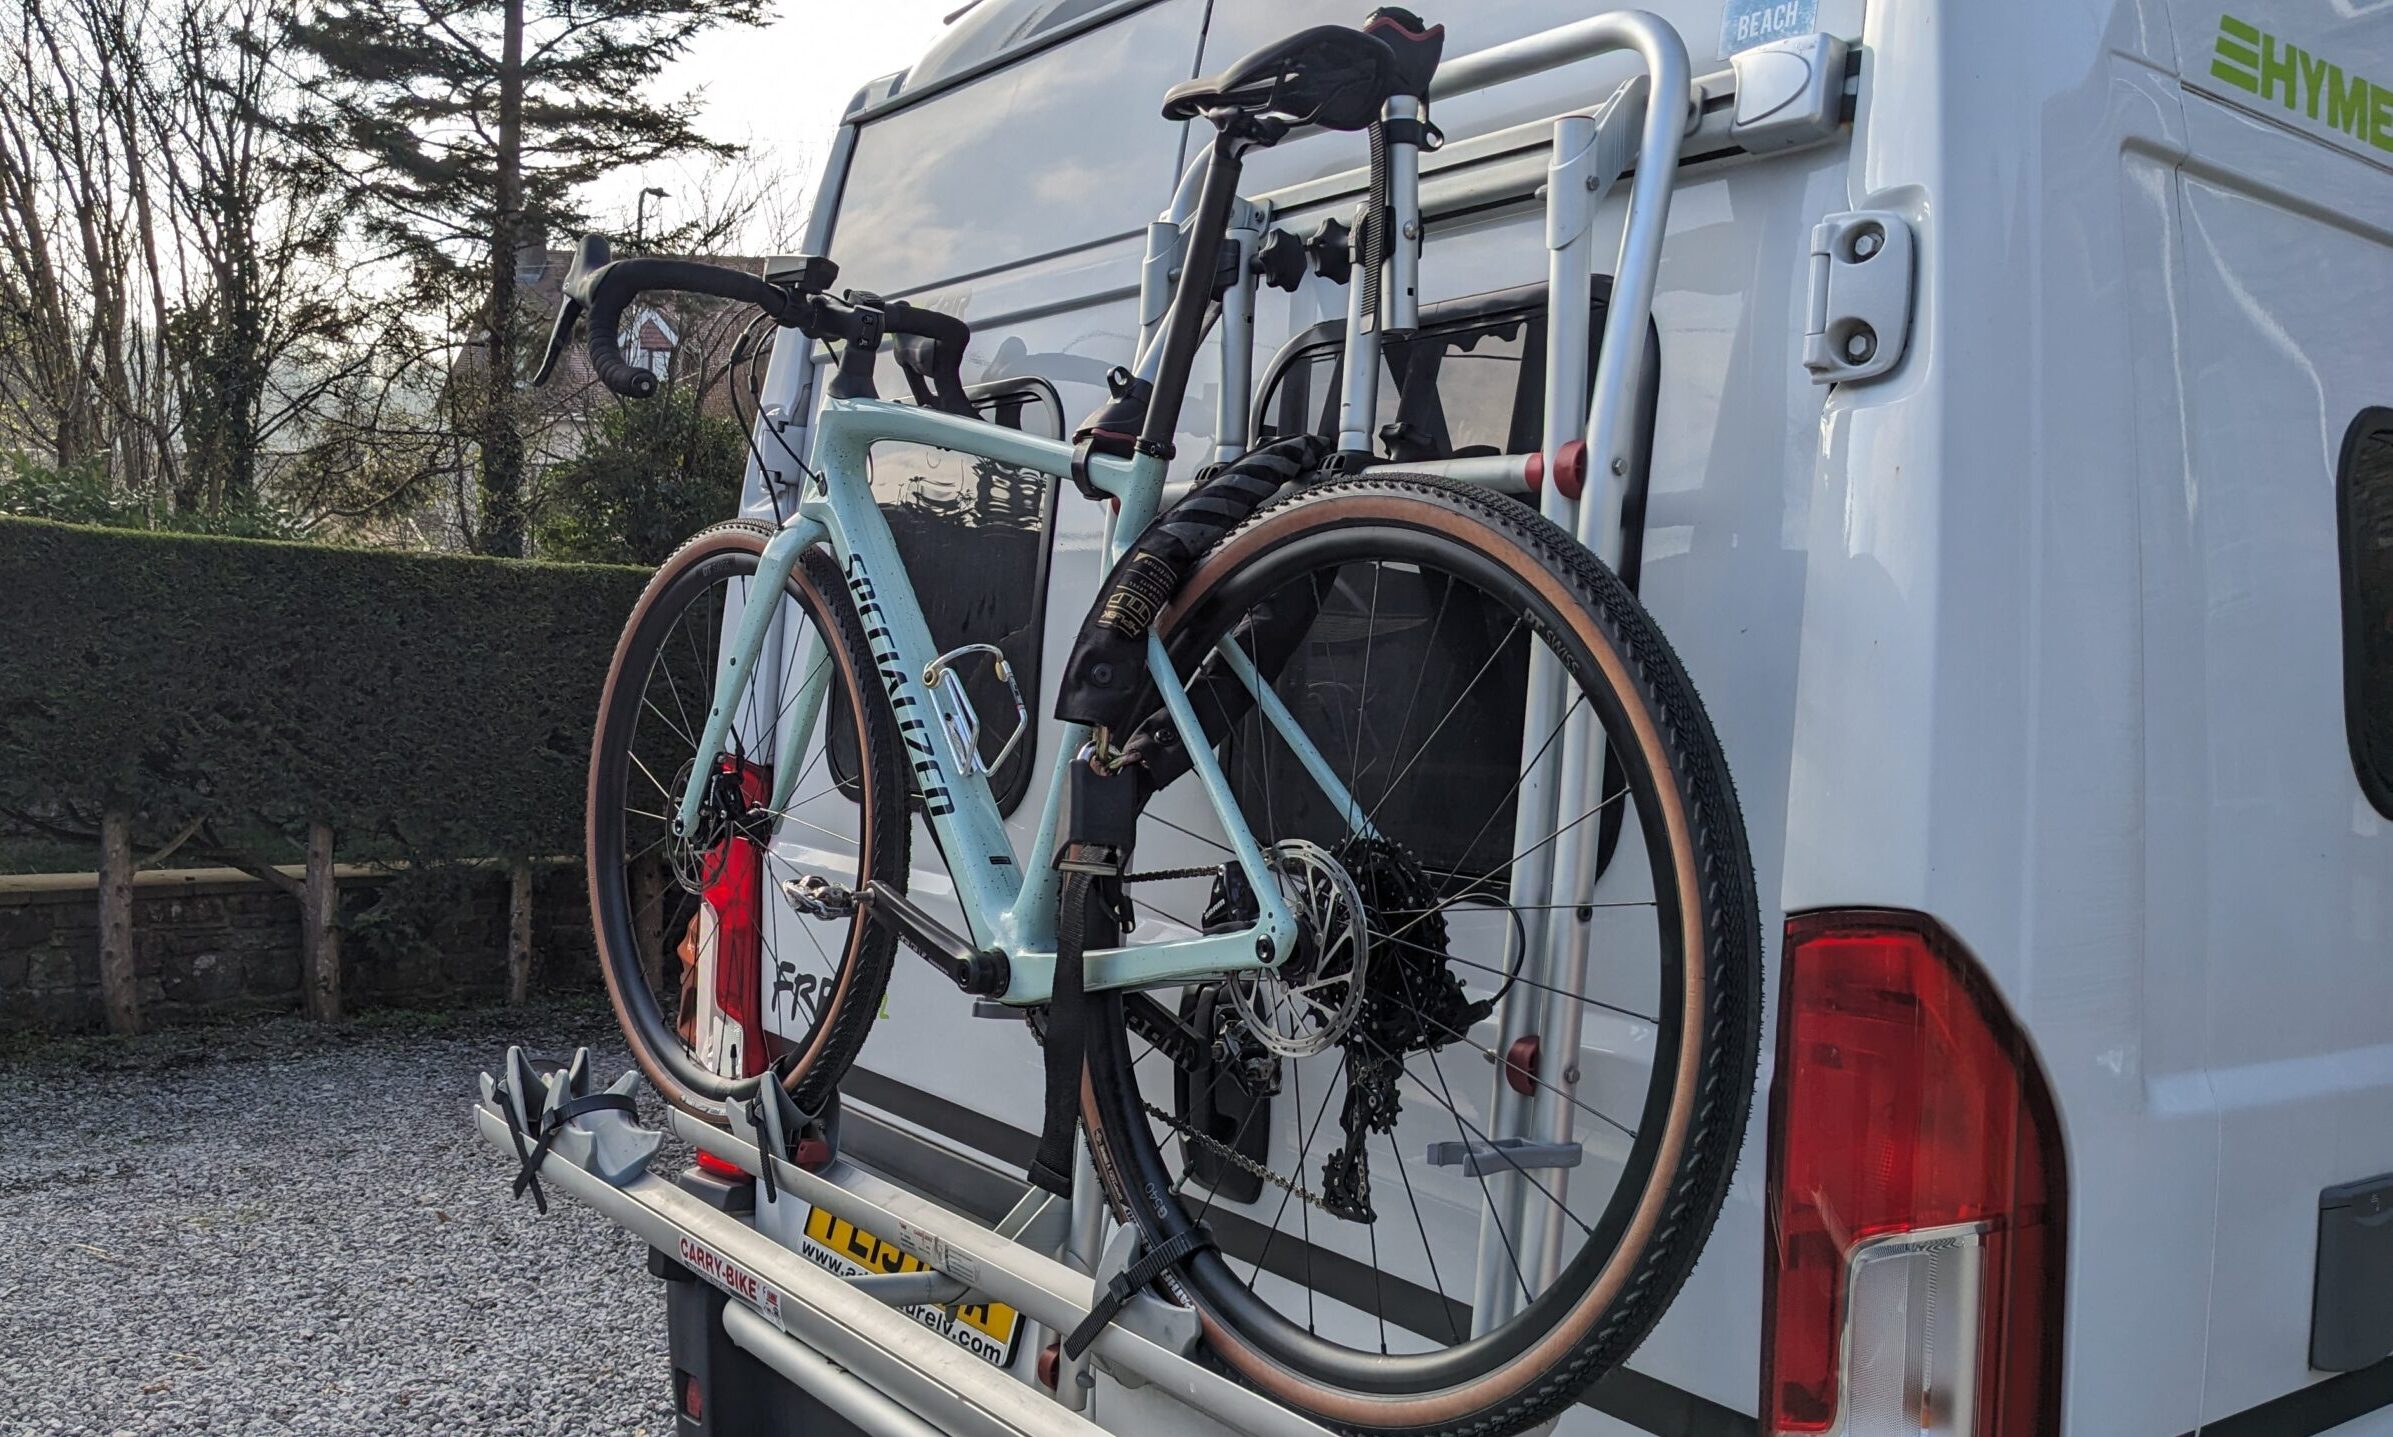 Bicycle locked to the back of a motorhome